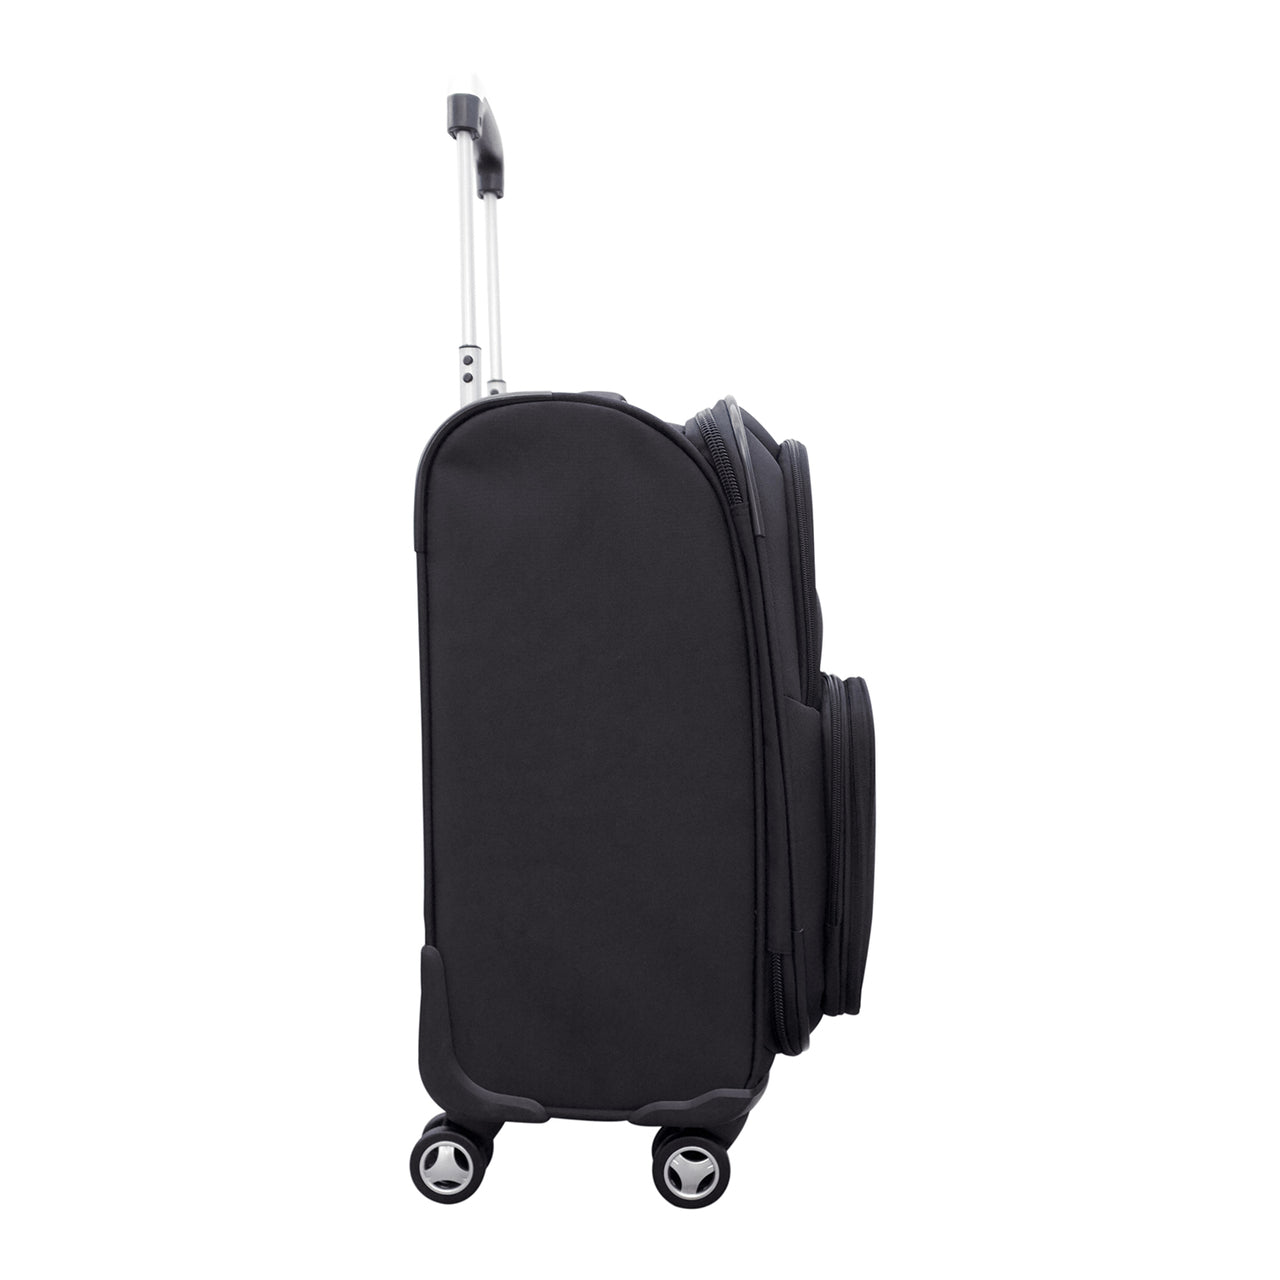 Tampa Bay Lightning 21" Carry-on Spinner Luggage